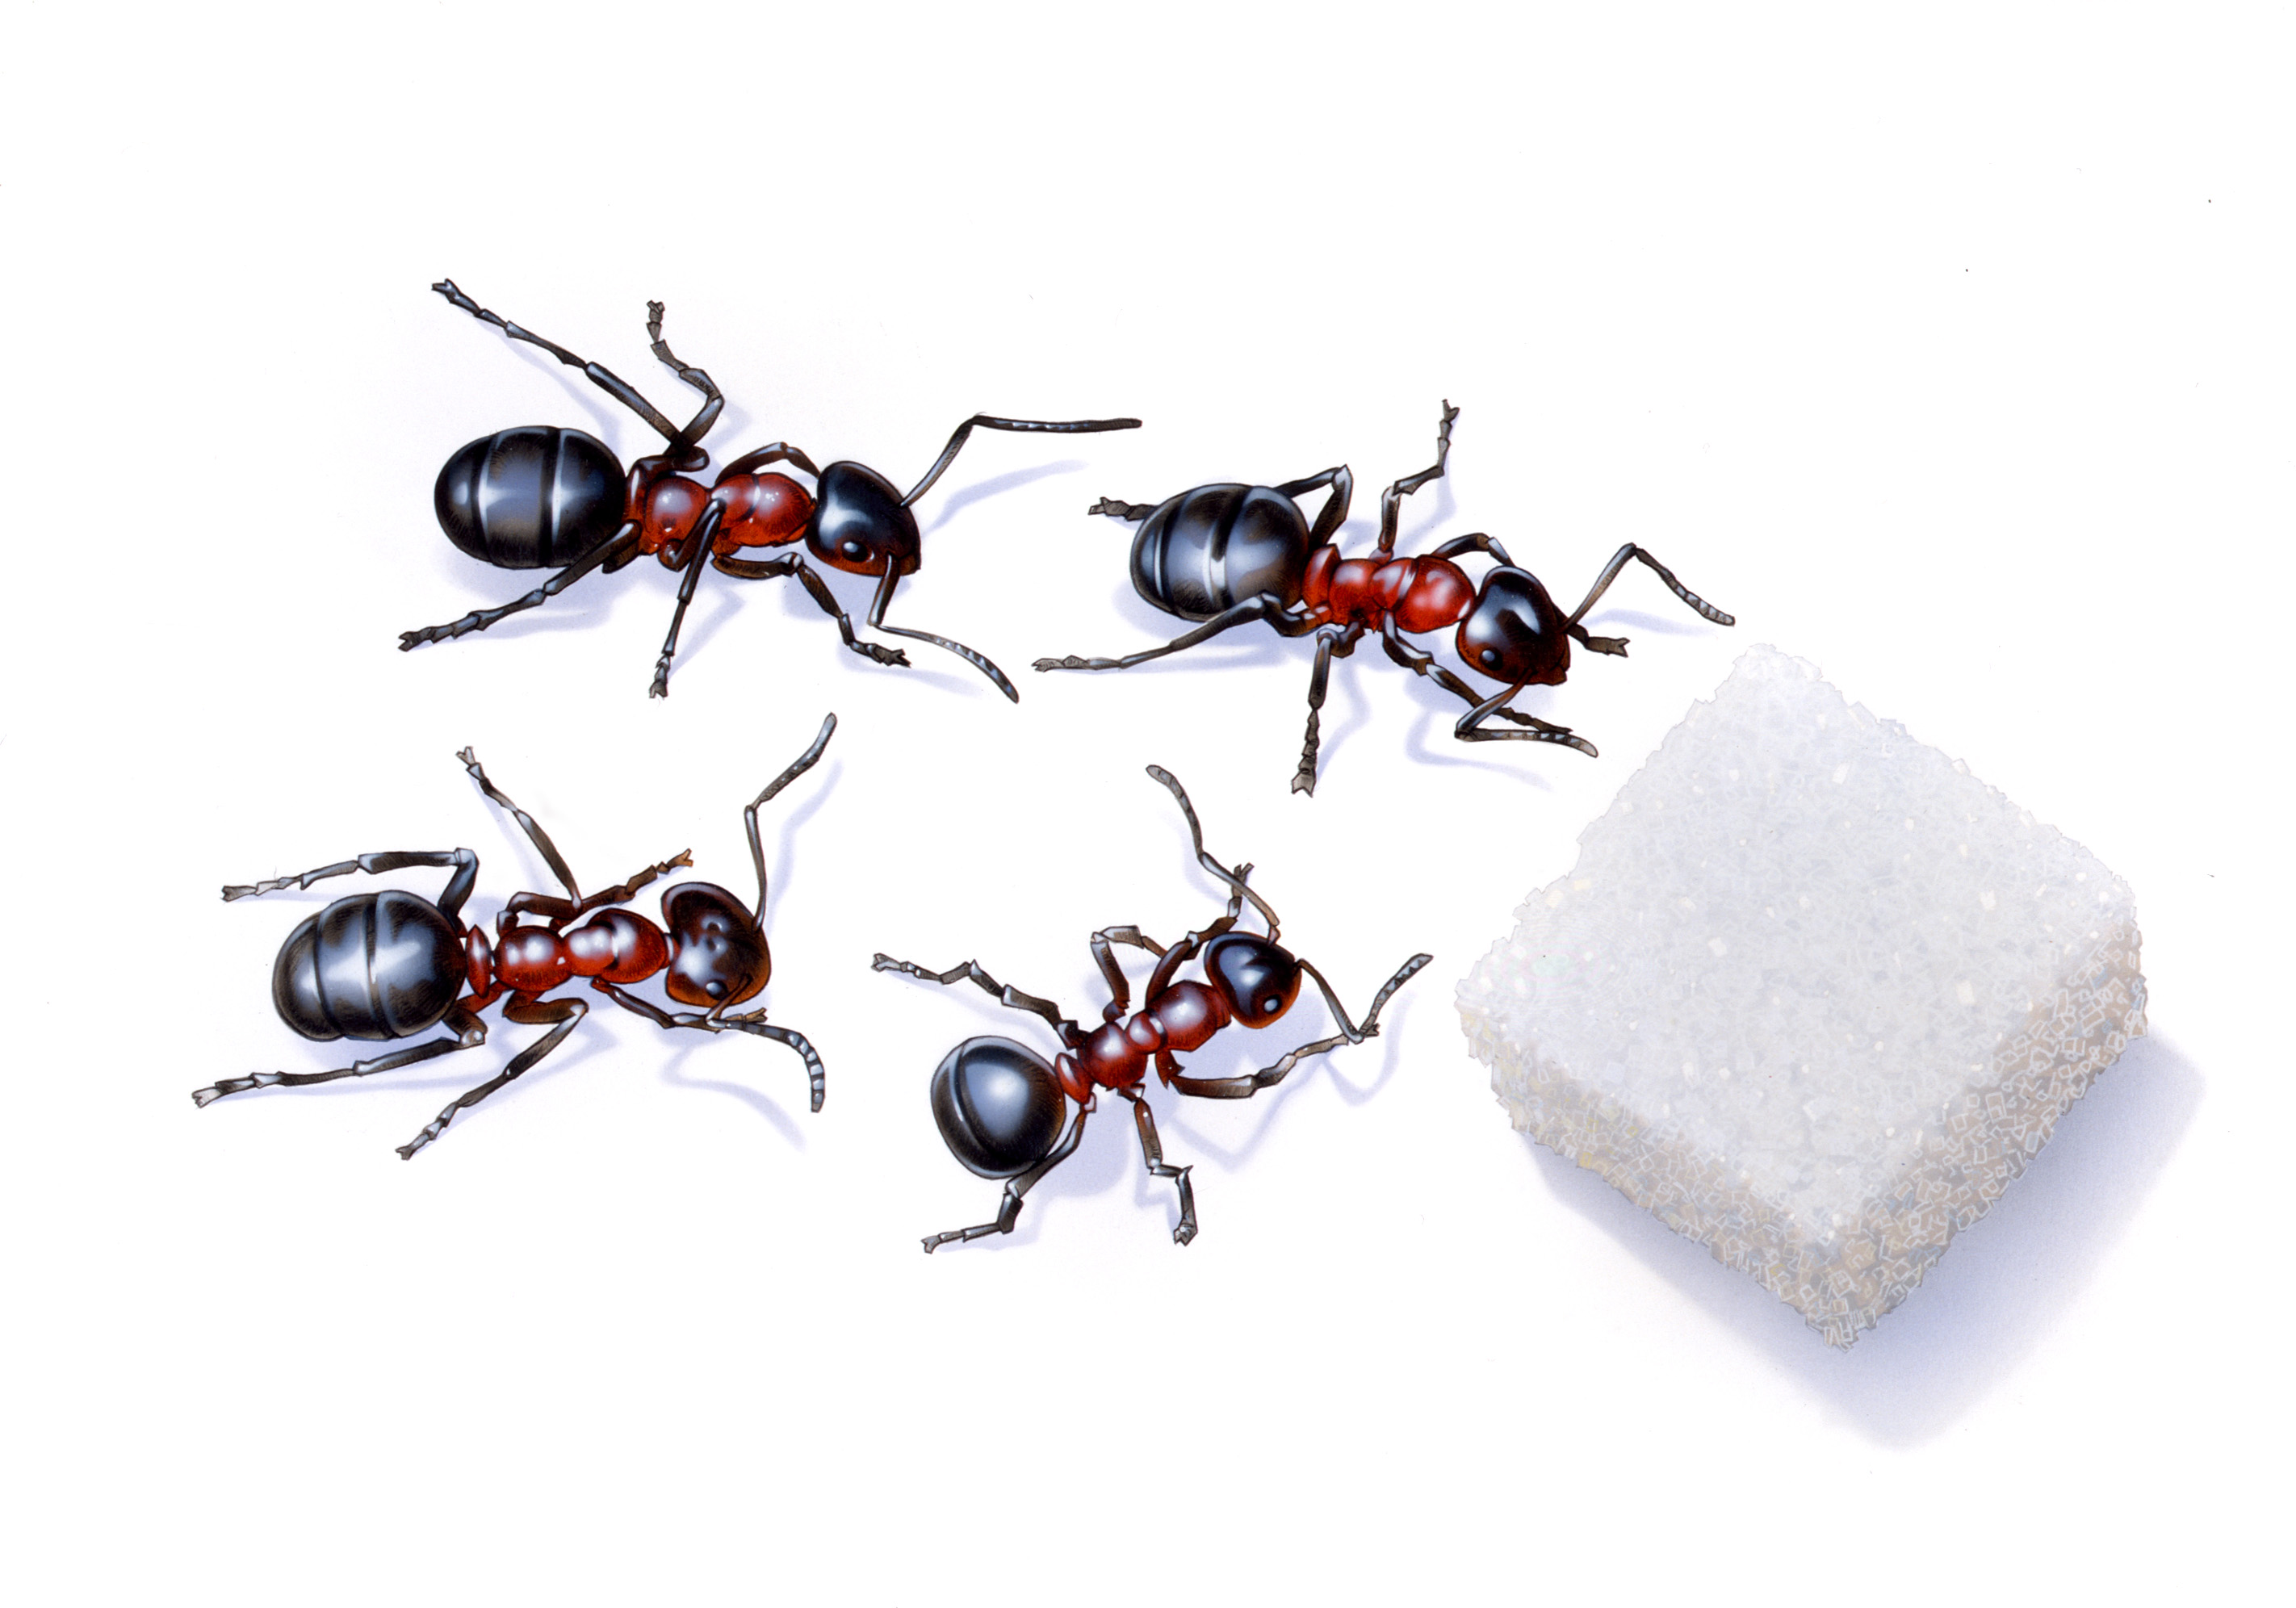 Ants eating sugar working insects insekter myror socker